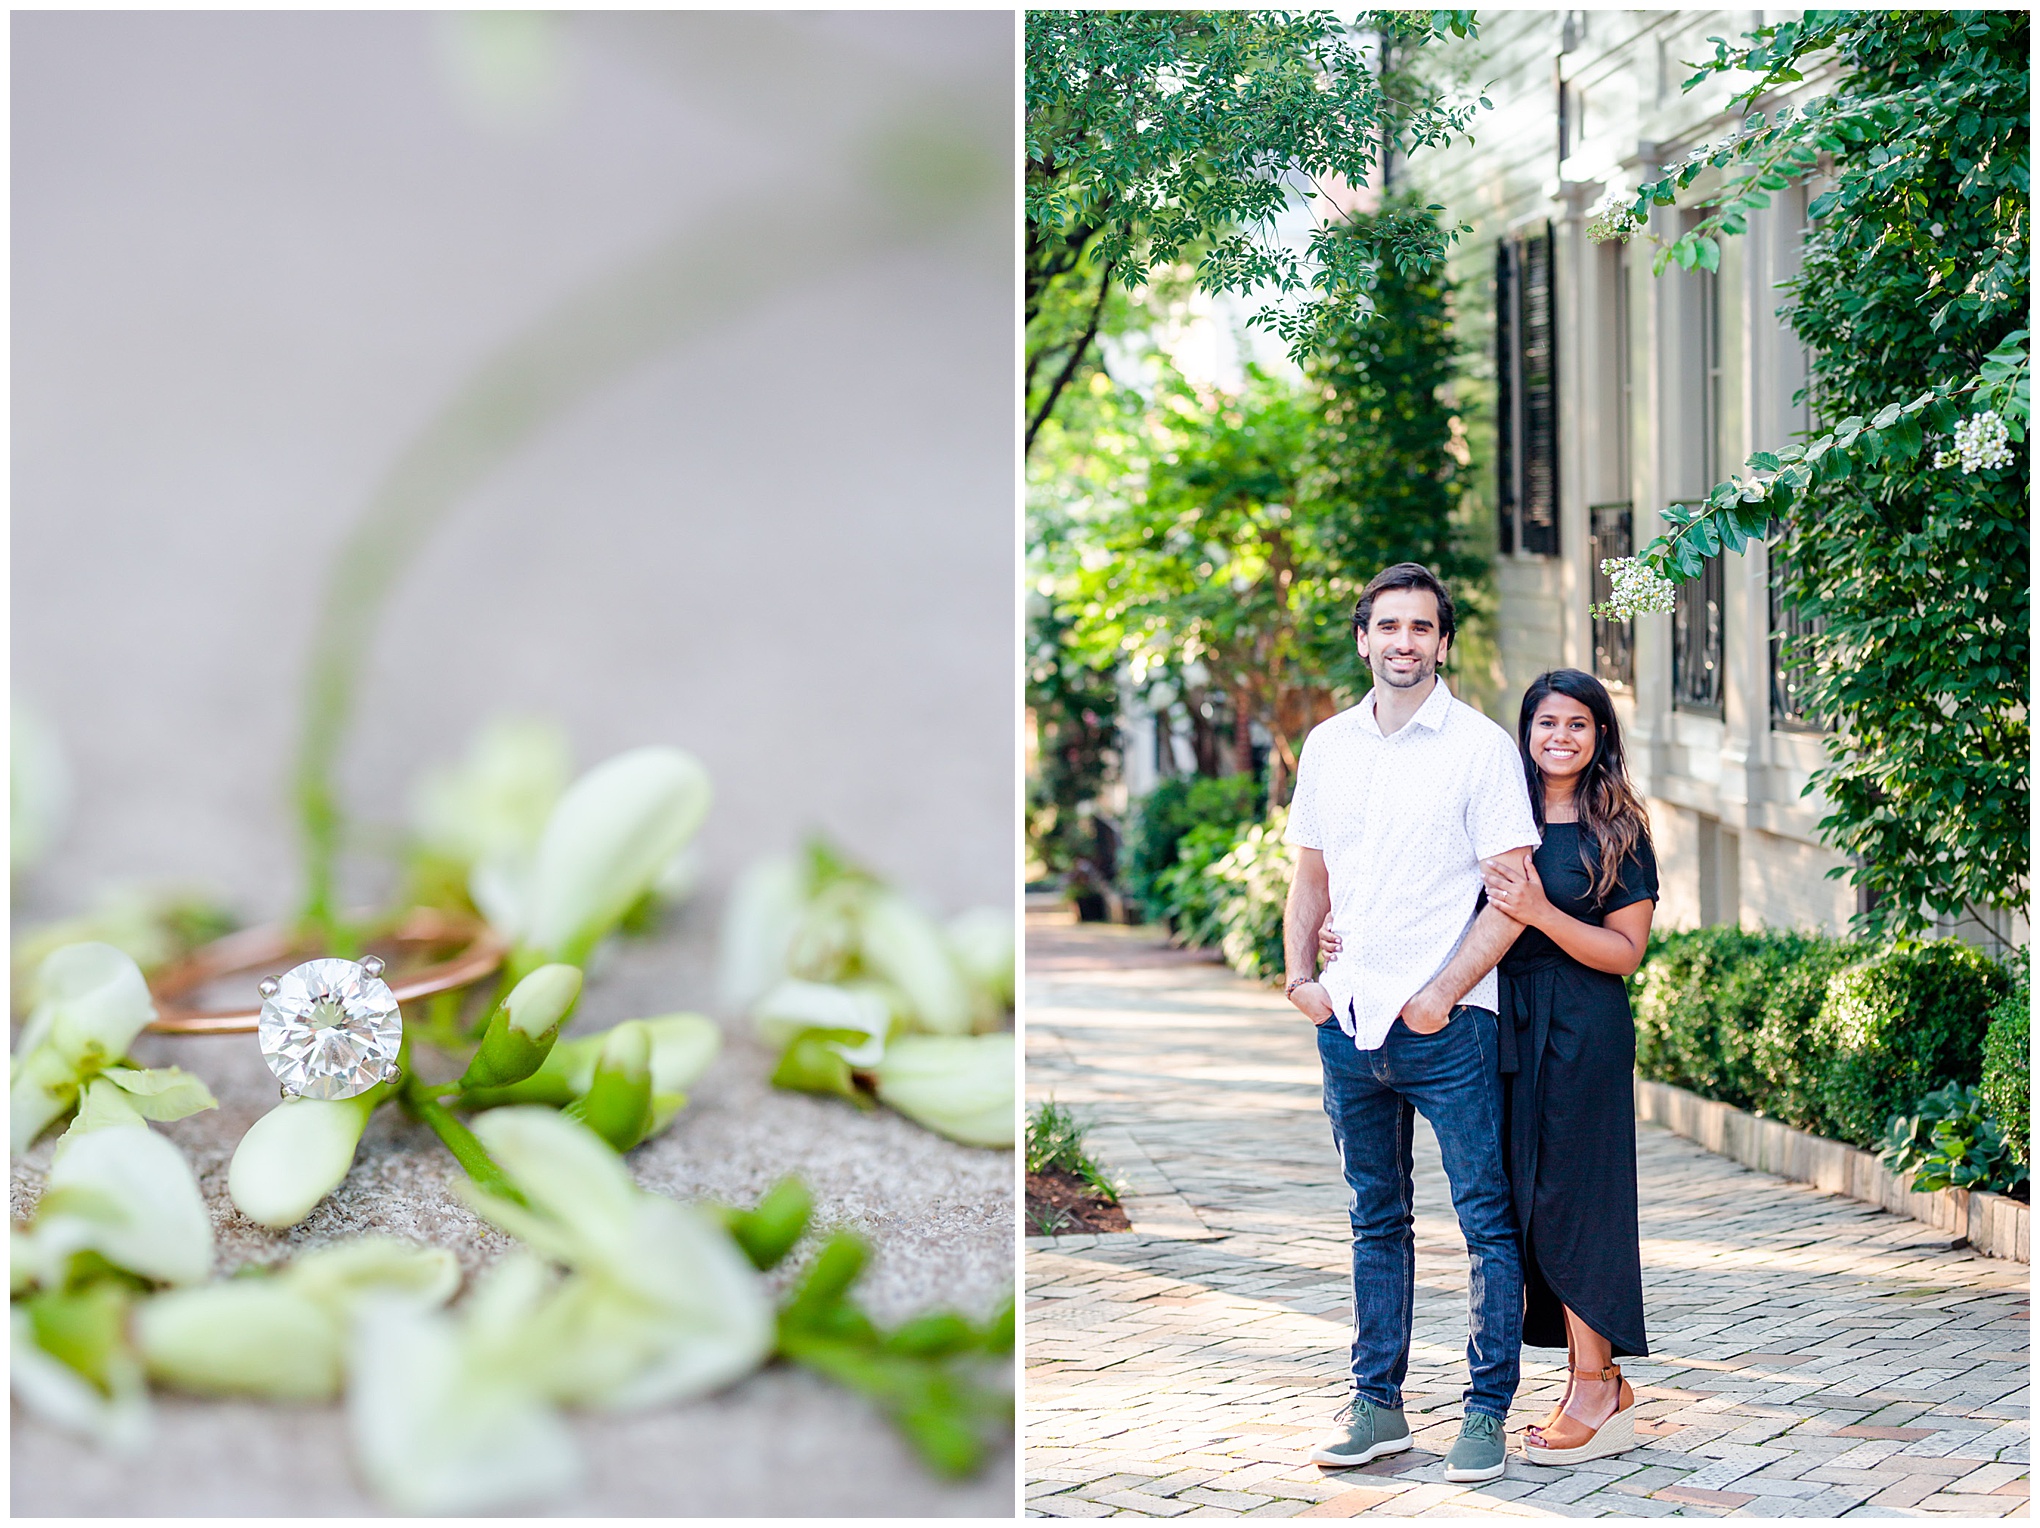 Old Town Alexandria engagement photos, Alexandria engagement photos, Old Town Alexandria photos, Old Town Alexandria, Alexandria engagement photos, Alexandria Virginia, classic engagement photos, historic town engagement photos, engagement photos, Rachel E.H. Photography, rose gold and diamond engagement ring